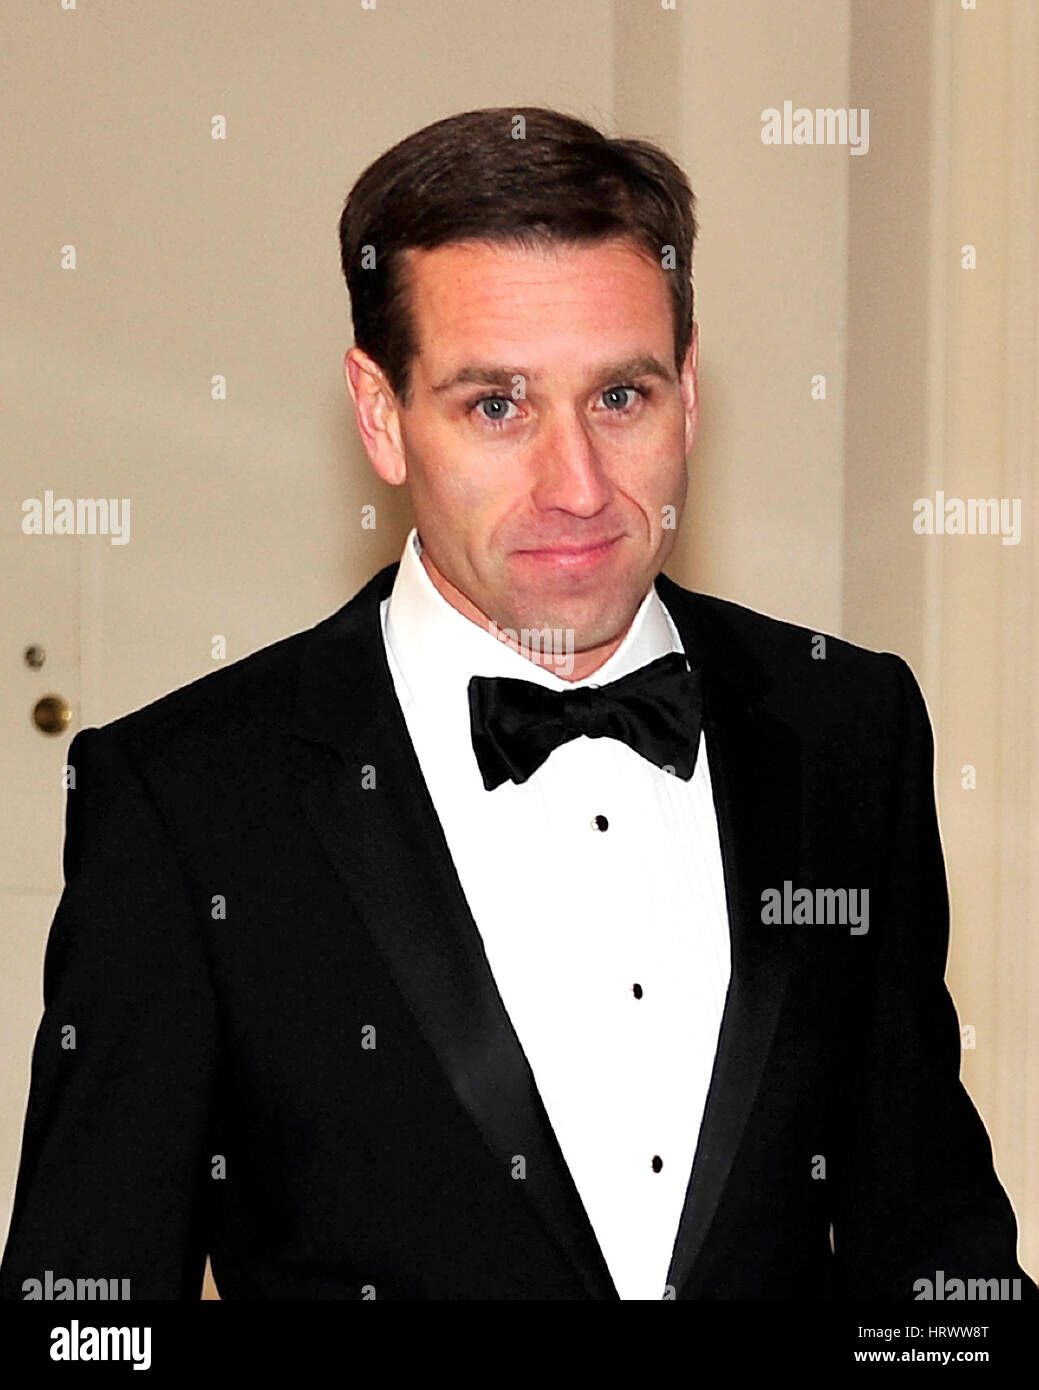 Joseph Beau Biden, III, Attorney General of Delaware arrives for the State Dinner in honor of President Hu Jintao of China at the White House In Washington, DC on Wednesday, January 19, 2011. Beau Biden passed away on May 30, 2015 from brain cancer. He was 46 years old. It was reported on Thursday, March 2, 2017 that his brother, Hunter, is in a relationship Beau's wife, Hallie, following his own separation separation from his wife, Kathleen, in late 2015. Credit: Ron Sachs/CNP - NO WIRE SERVICE - Photo: Ron Sachs/Consolidated News Photos/Ron Sachs/CNP Stock Photo